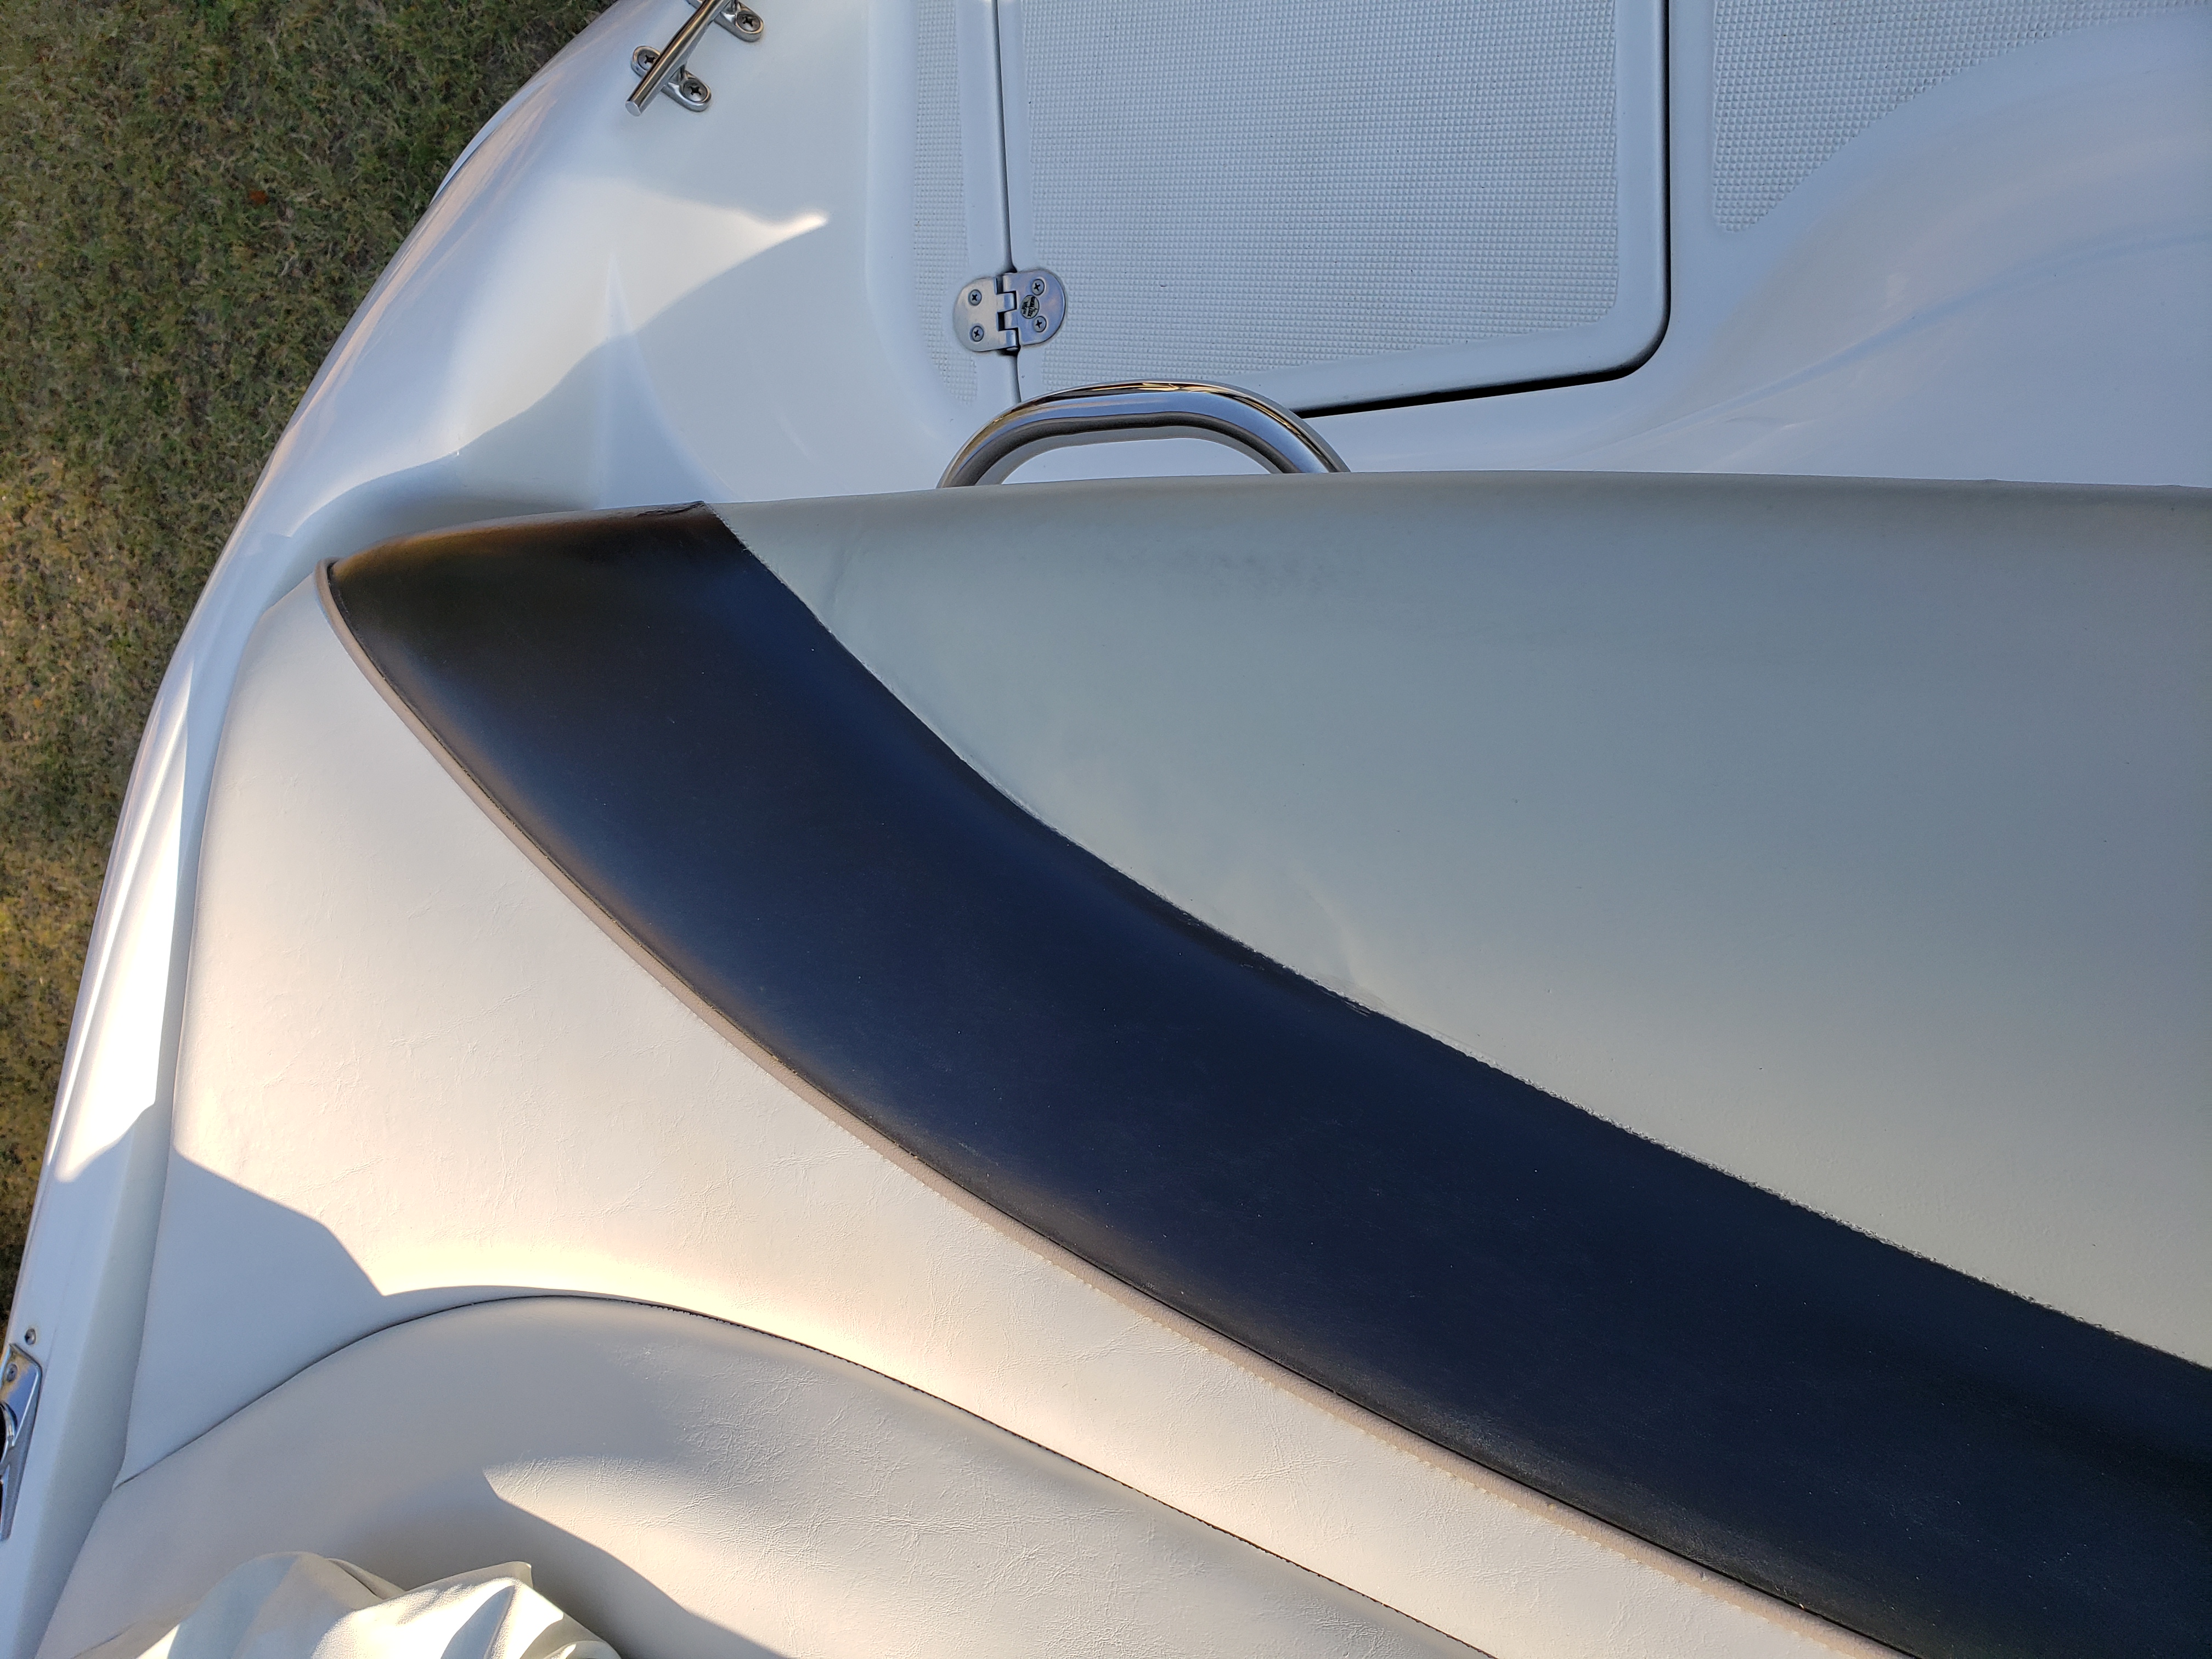 1999 Chris Craft 210 Bowrider Power boat for sale in Azle, TX - image 16 